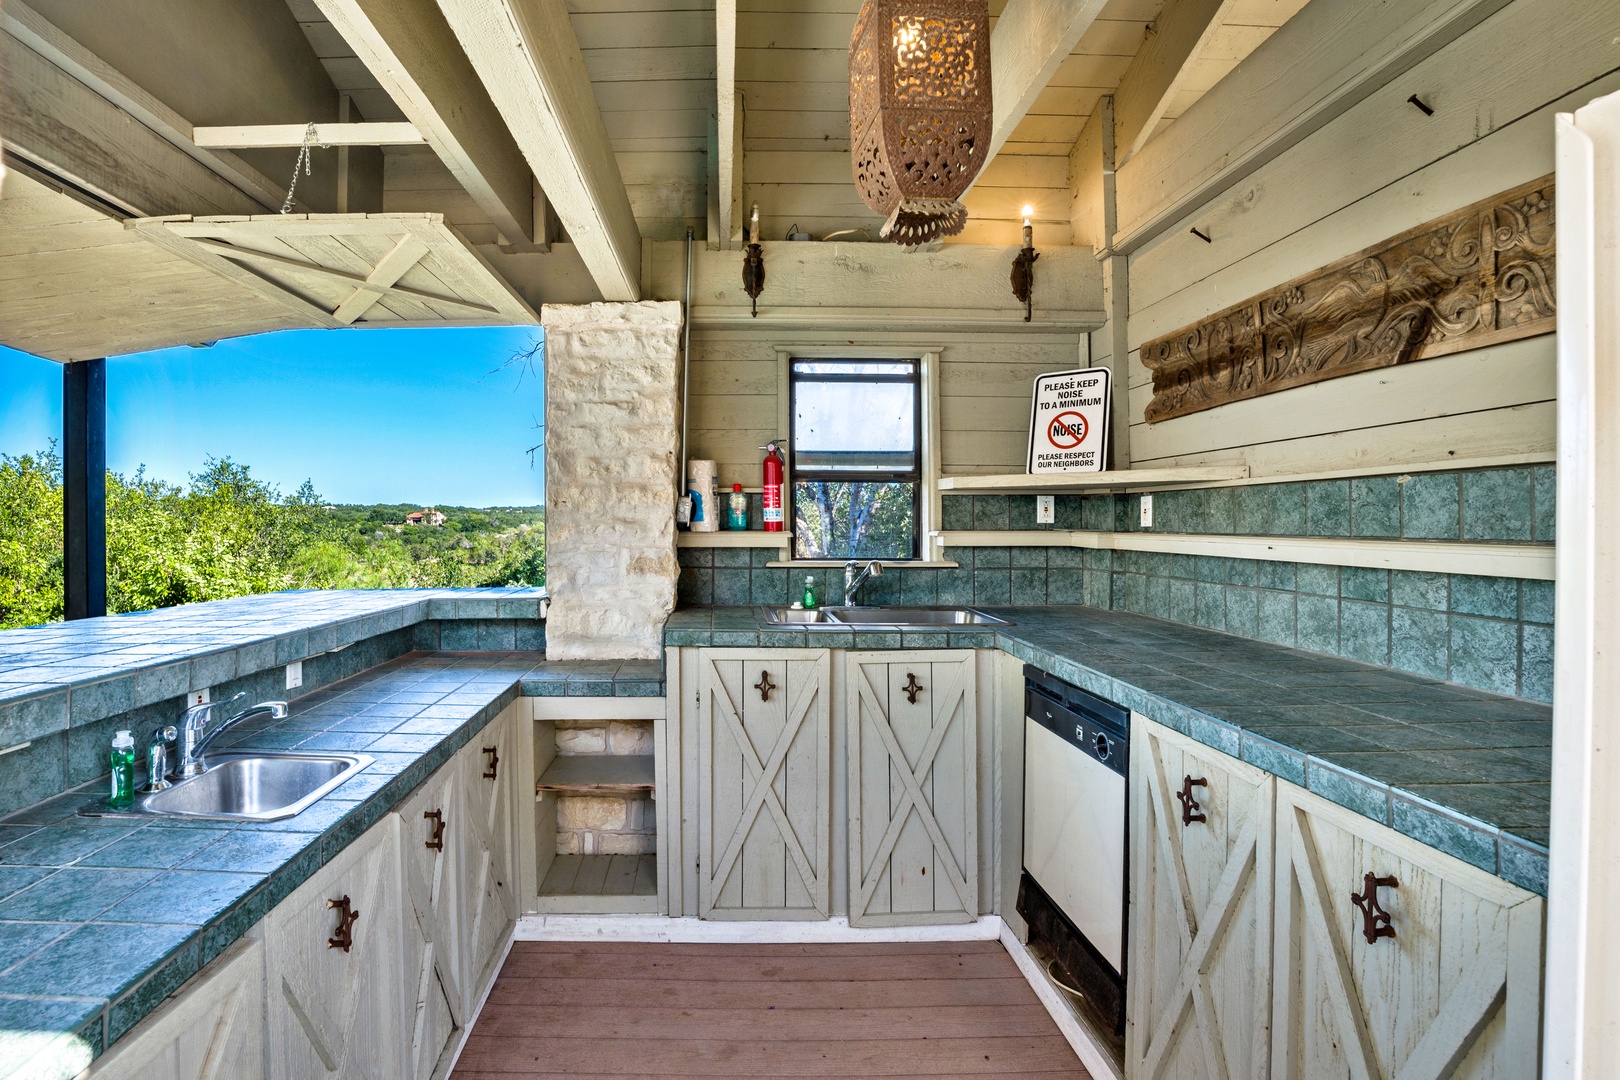 Outdoor kitchenette with sinks, dishwasher, and refrigerator